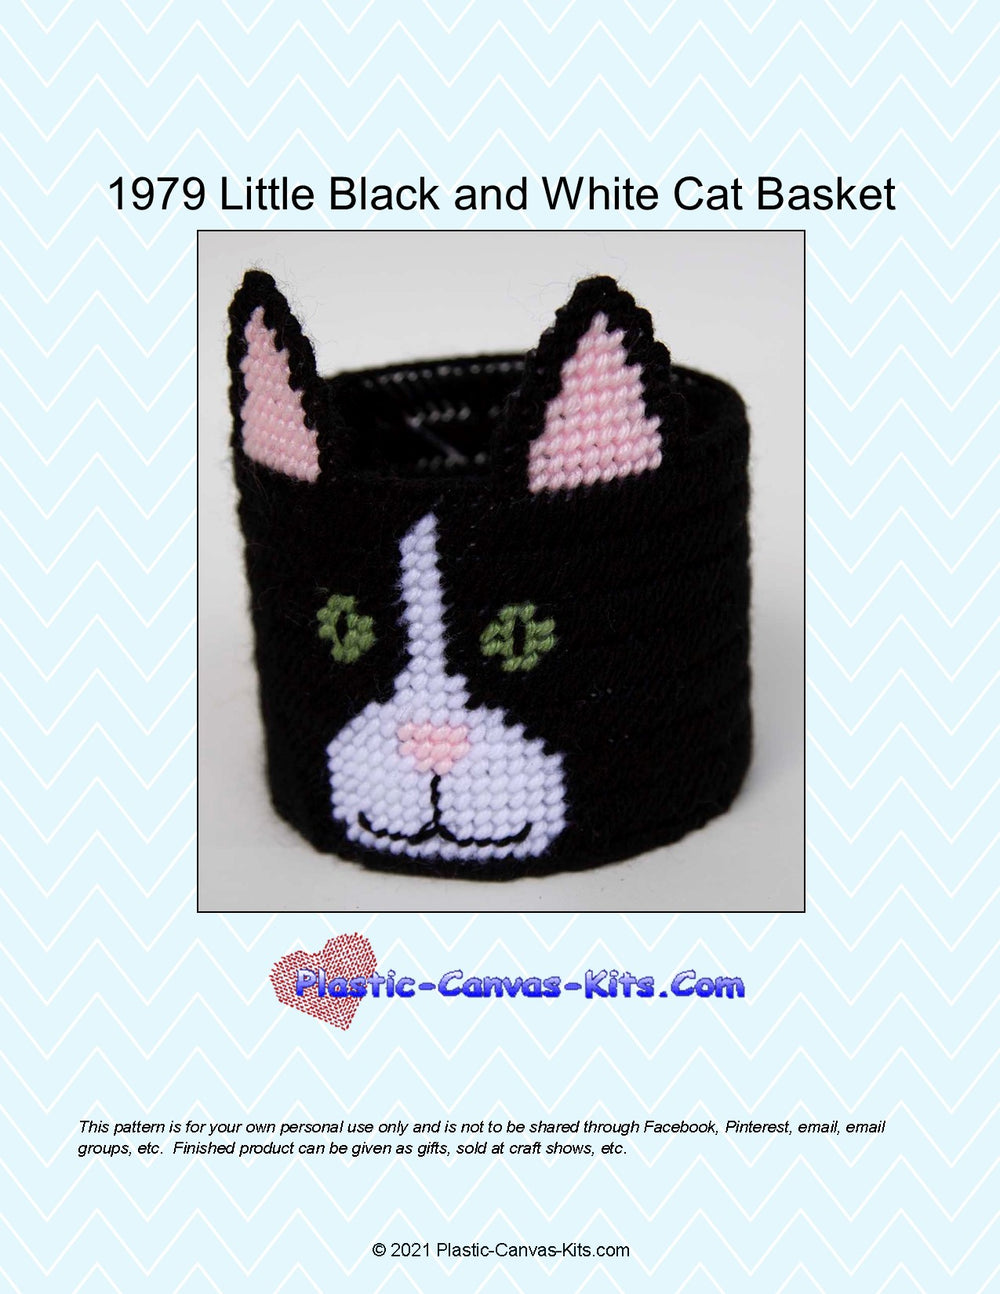 Little Black and White Cat Basket